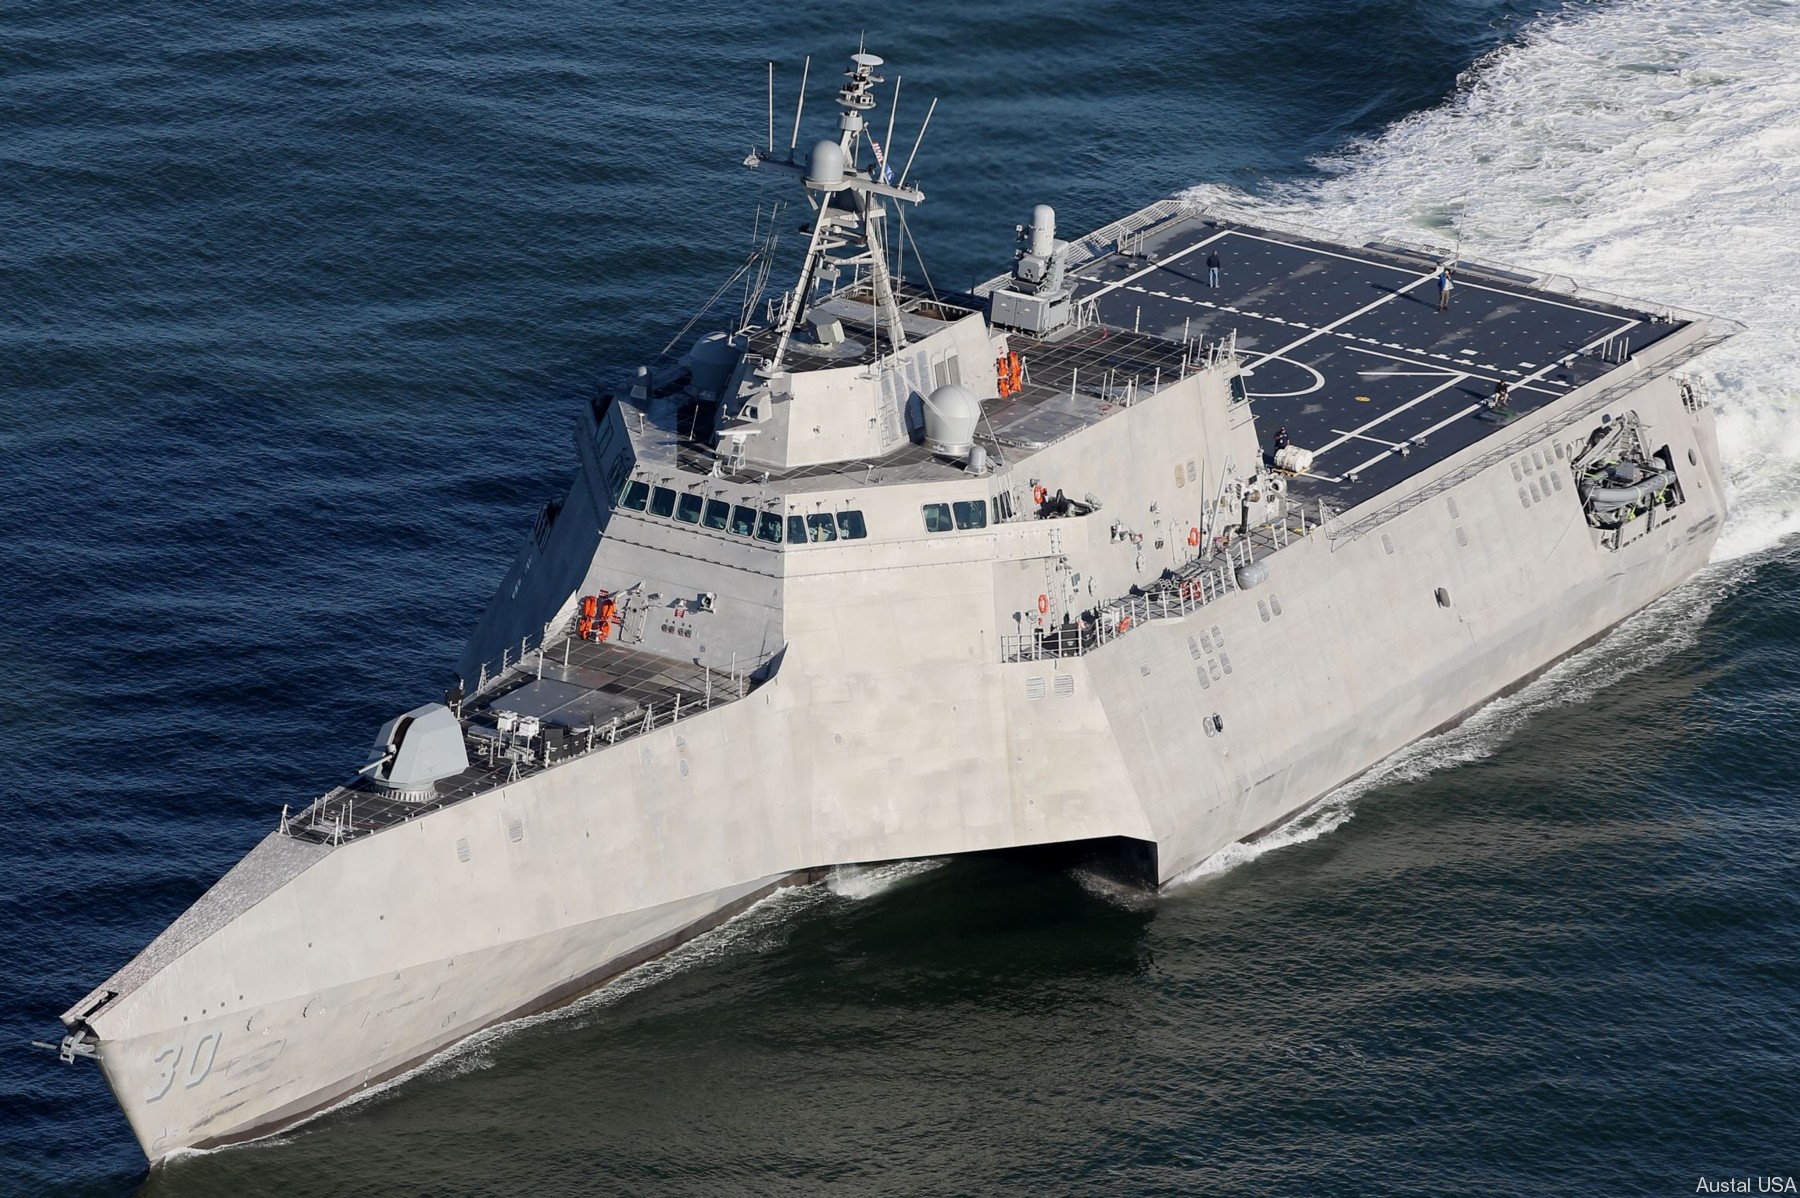 lcs-30 uss canberra littoral combat ship independence class us navy 06